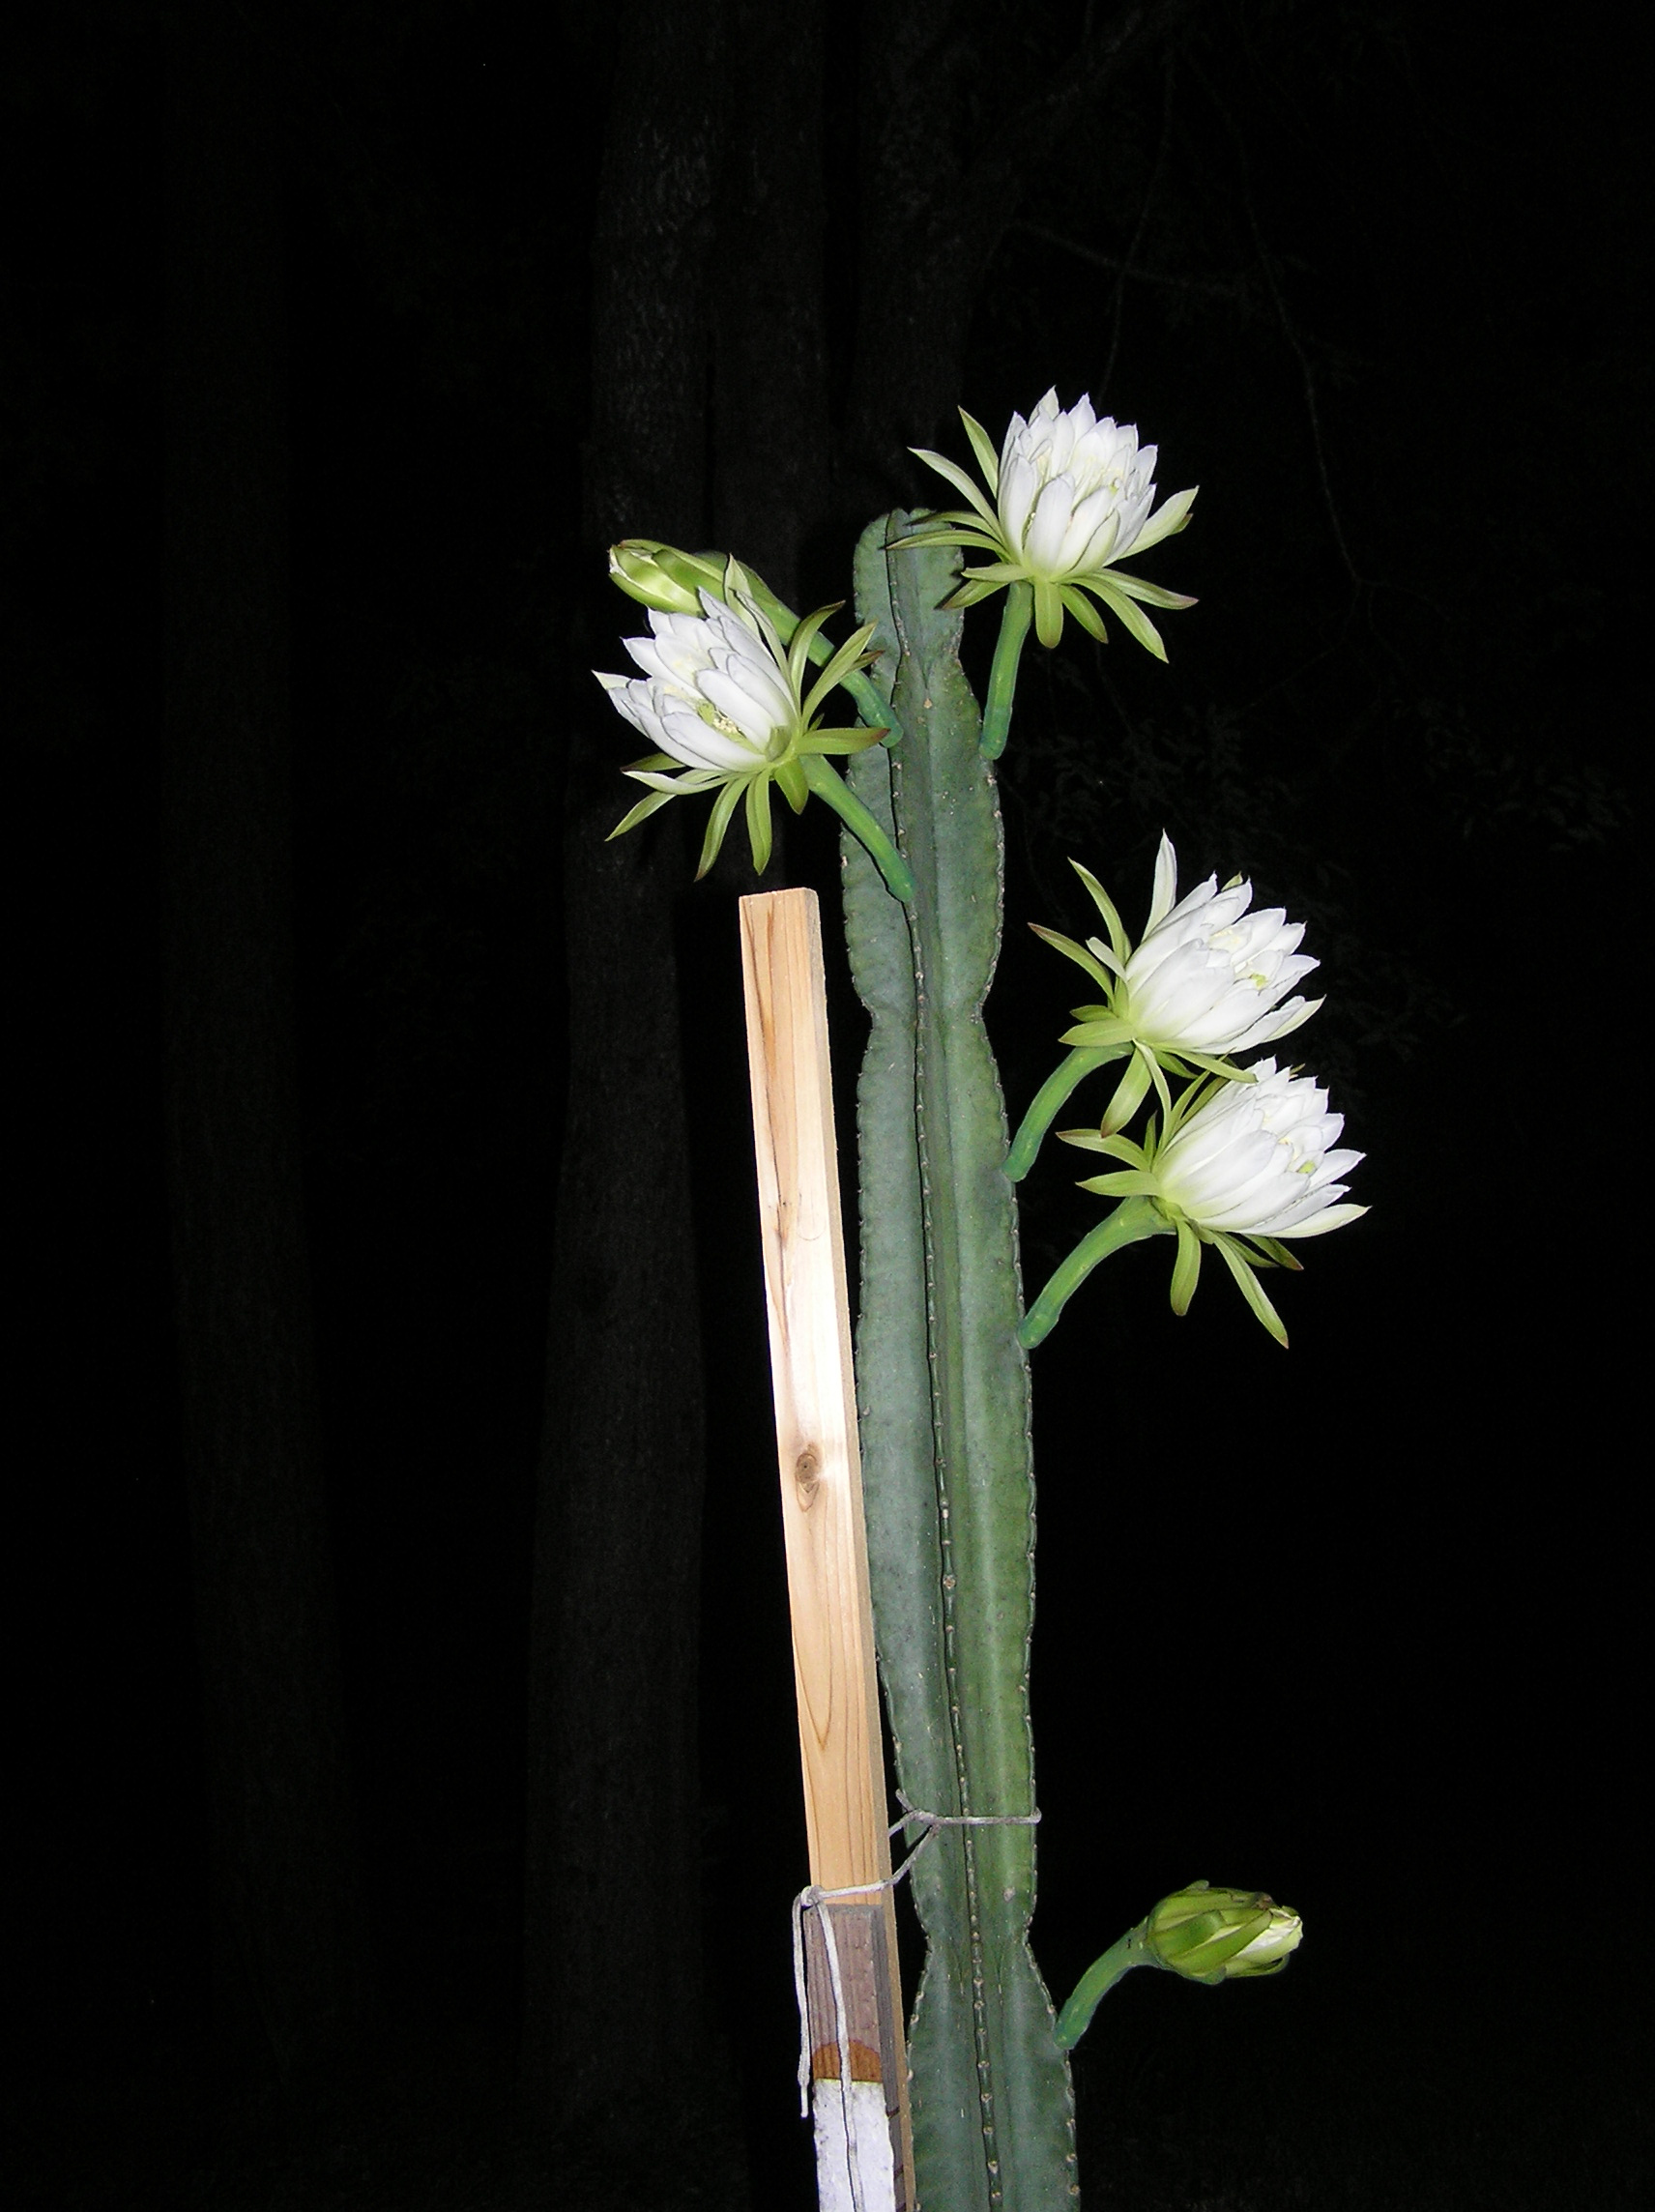 How To Care For A Night Blooming Cactus